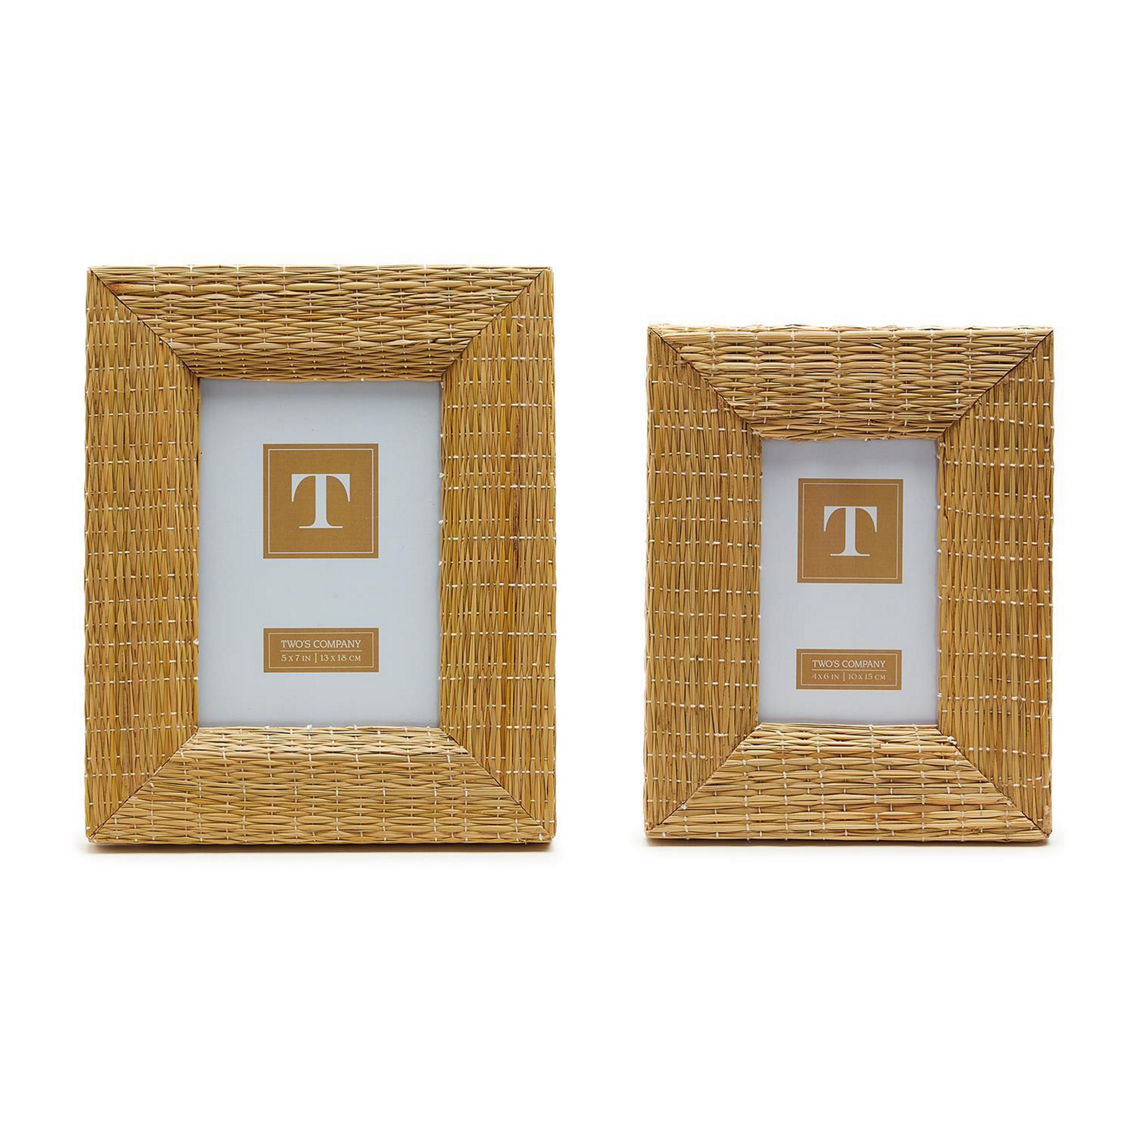 Two's Company S/2 Woven Reeds Frames - Image 5 of 5